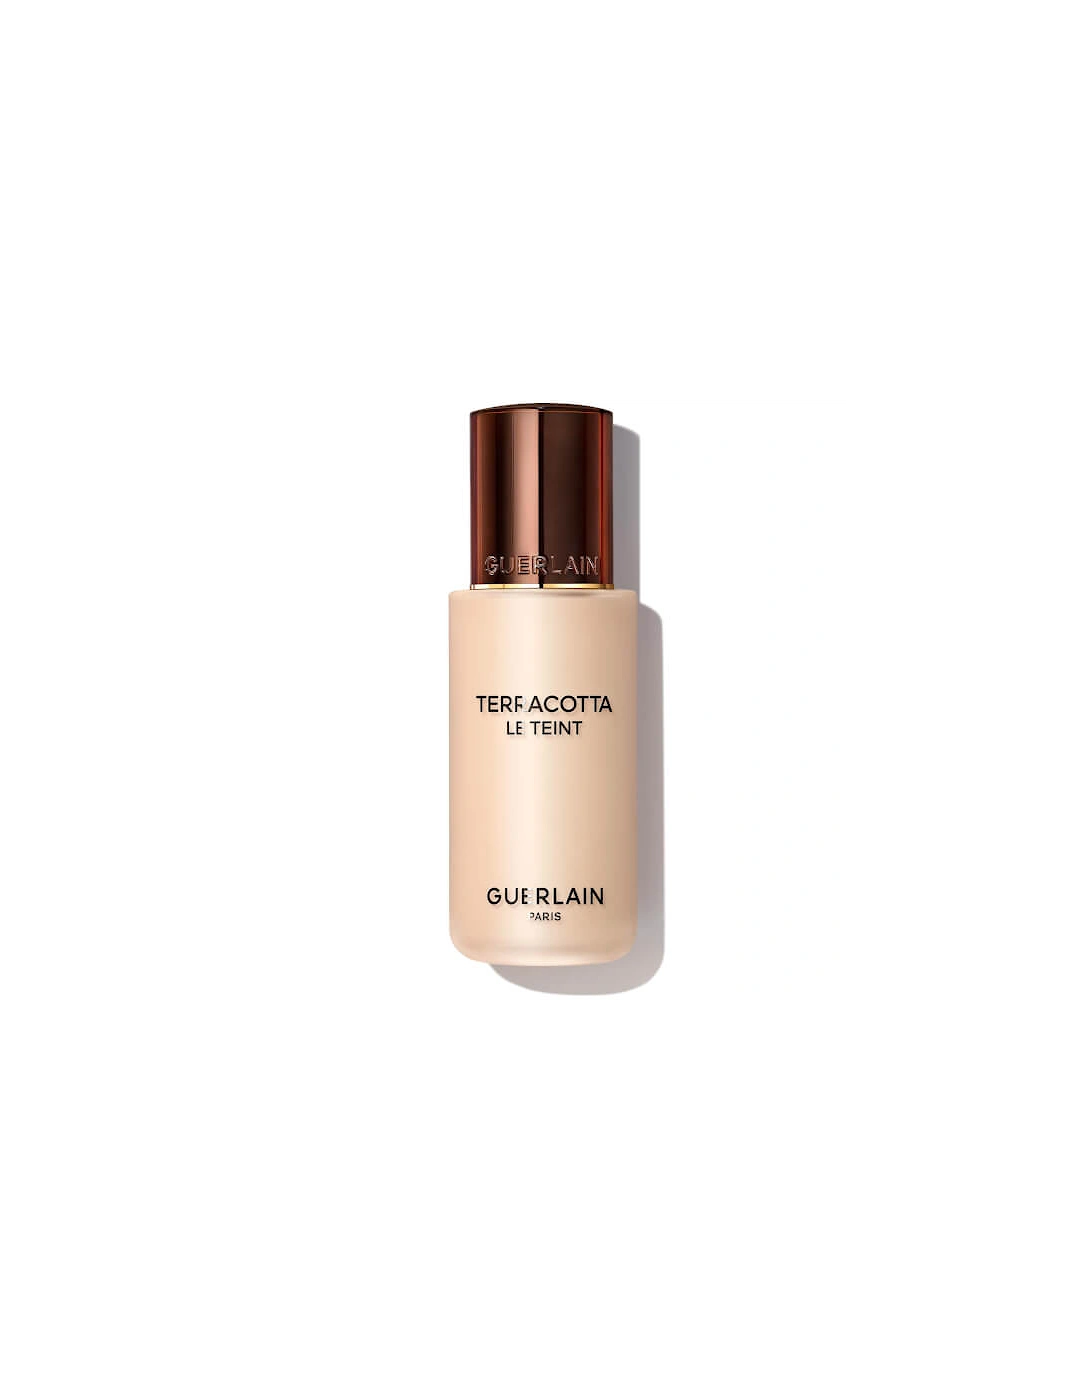 Terracotta Le Teint Healthy Glow Natural Perfection Foundation - 0.5N, 2 of 1